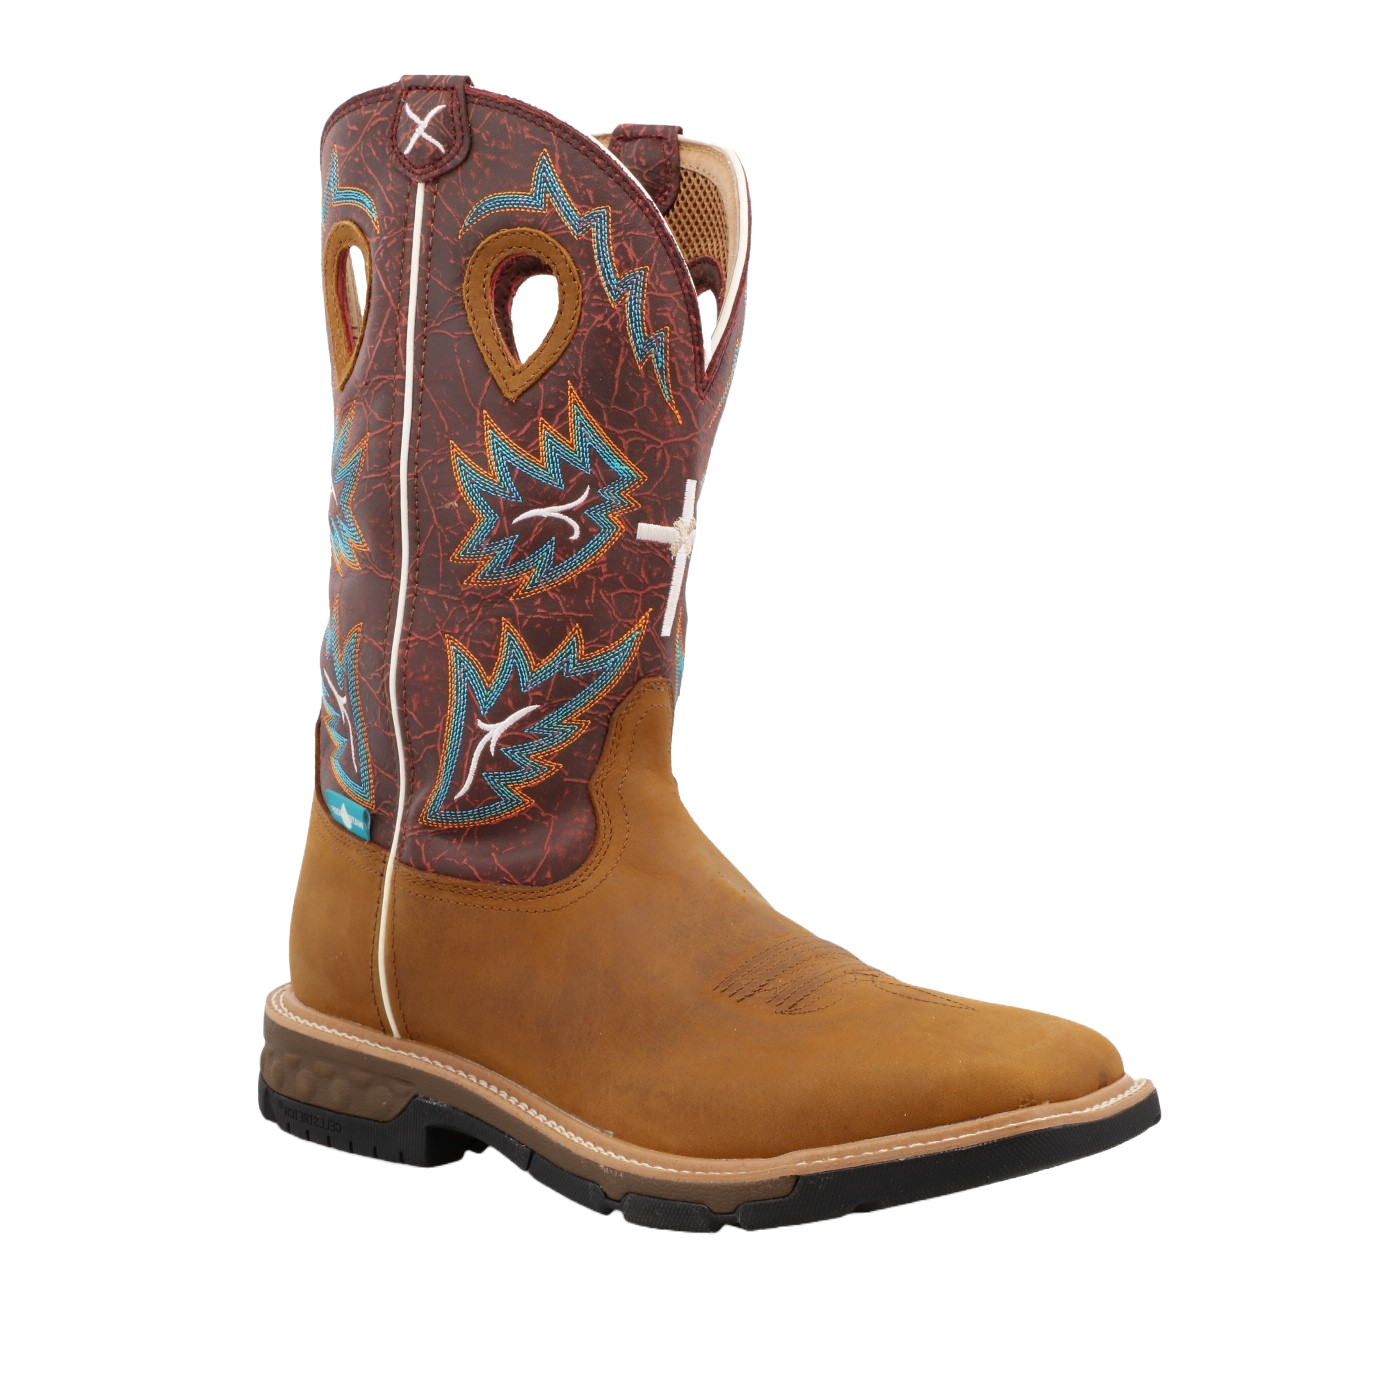 Twisted X Men's 12" Waterproof Tan & Burgundy Work Boots MXBW005